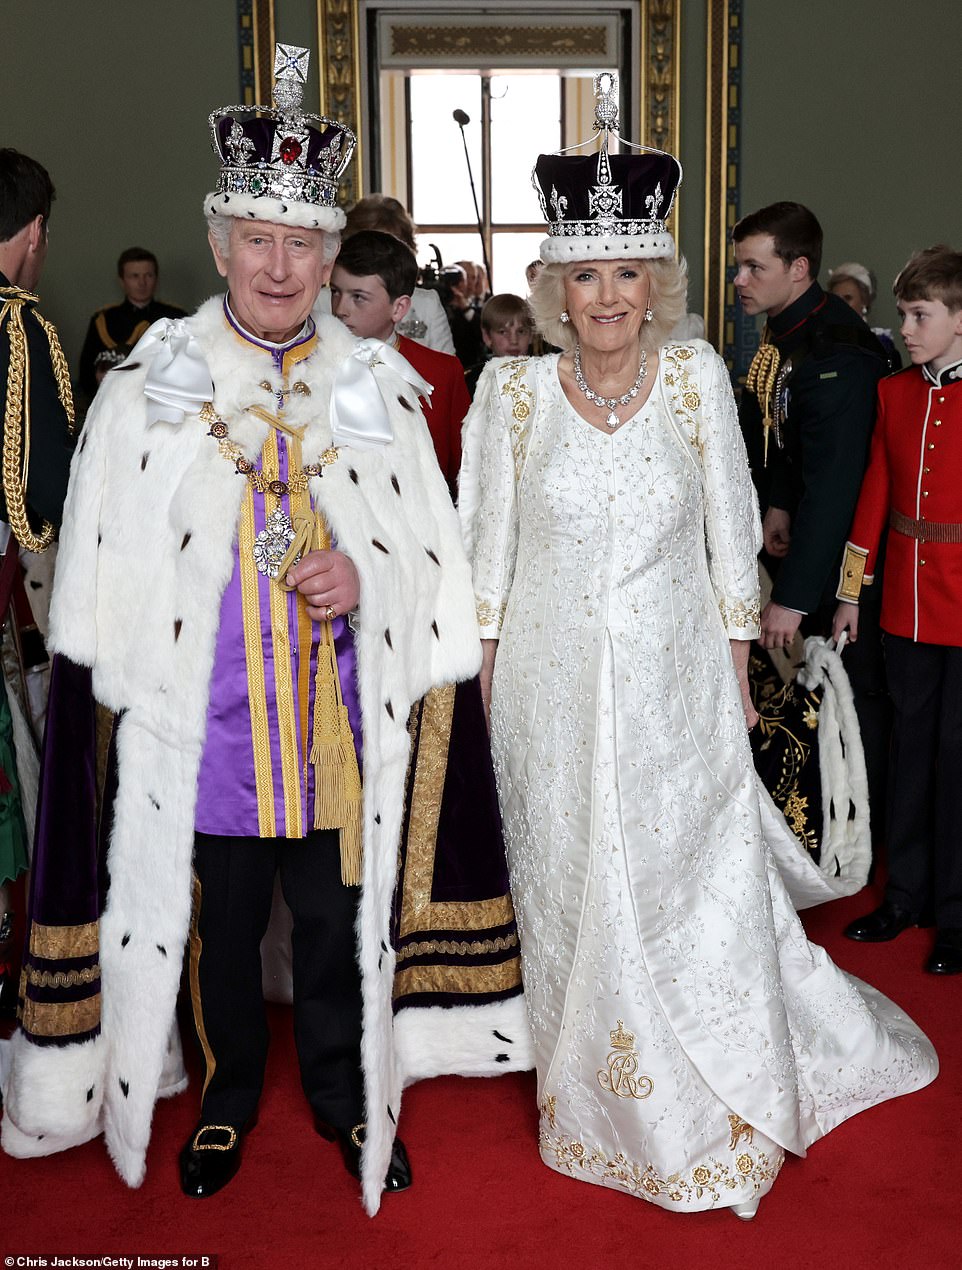 Another image released by the Palace following the Coronation today shows King Charles and Queen Camilla dressed in their regalia